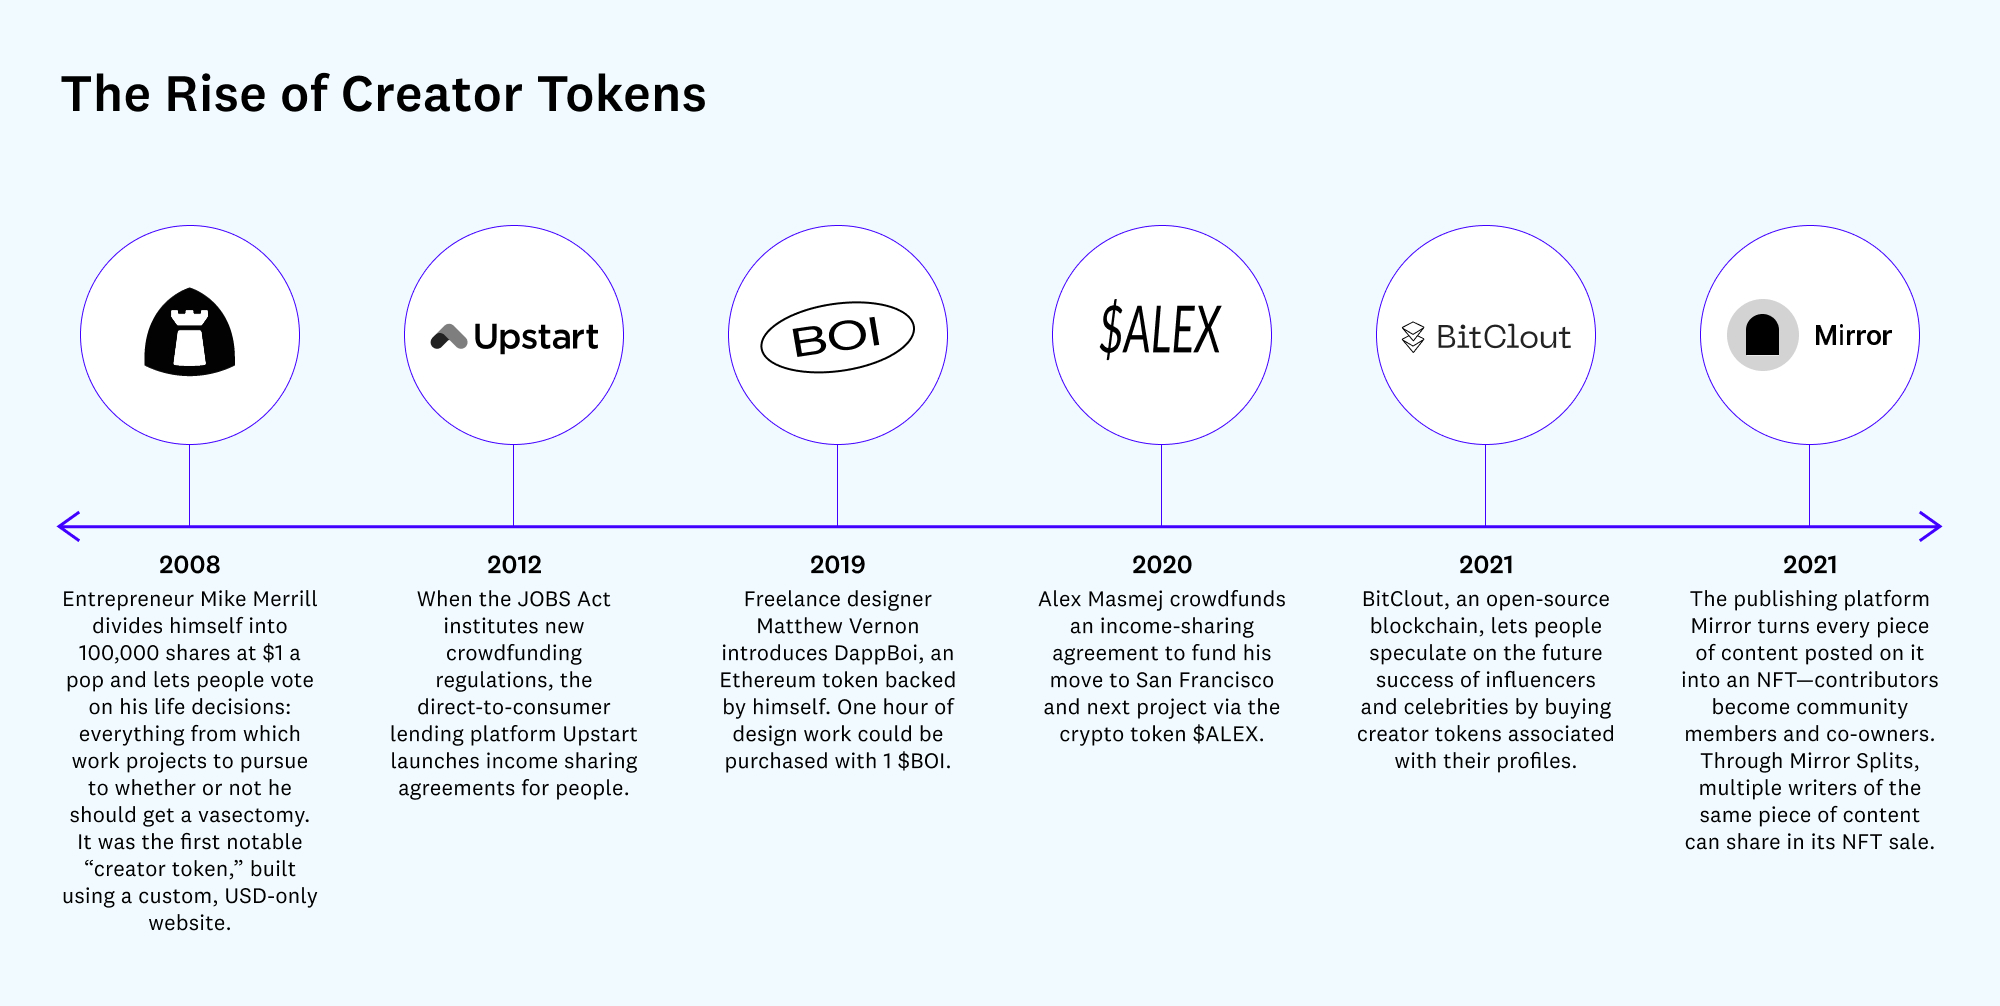 The Rise of Creator Tokens